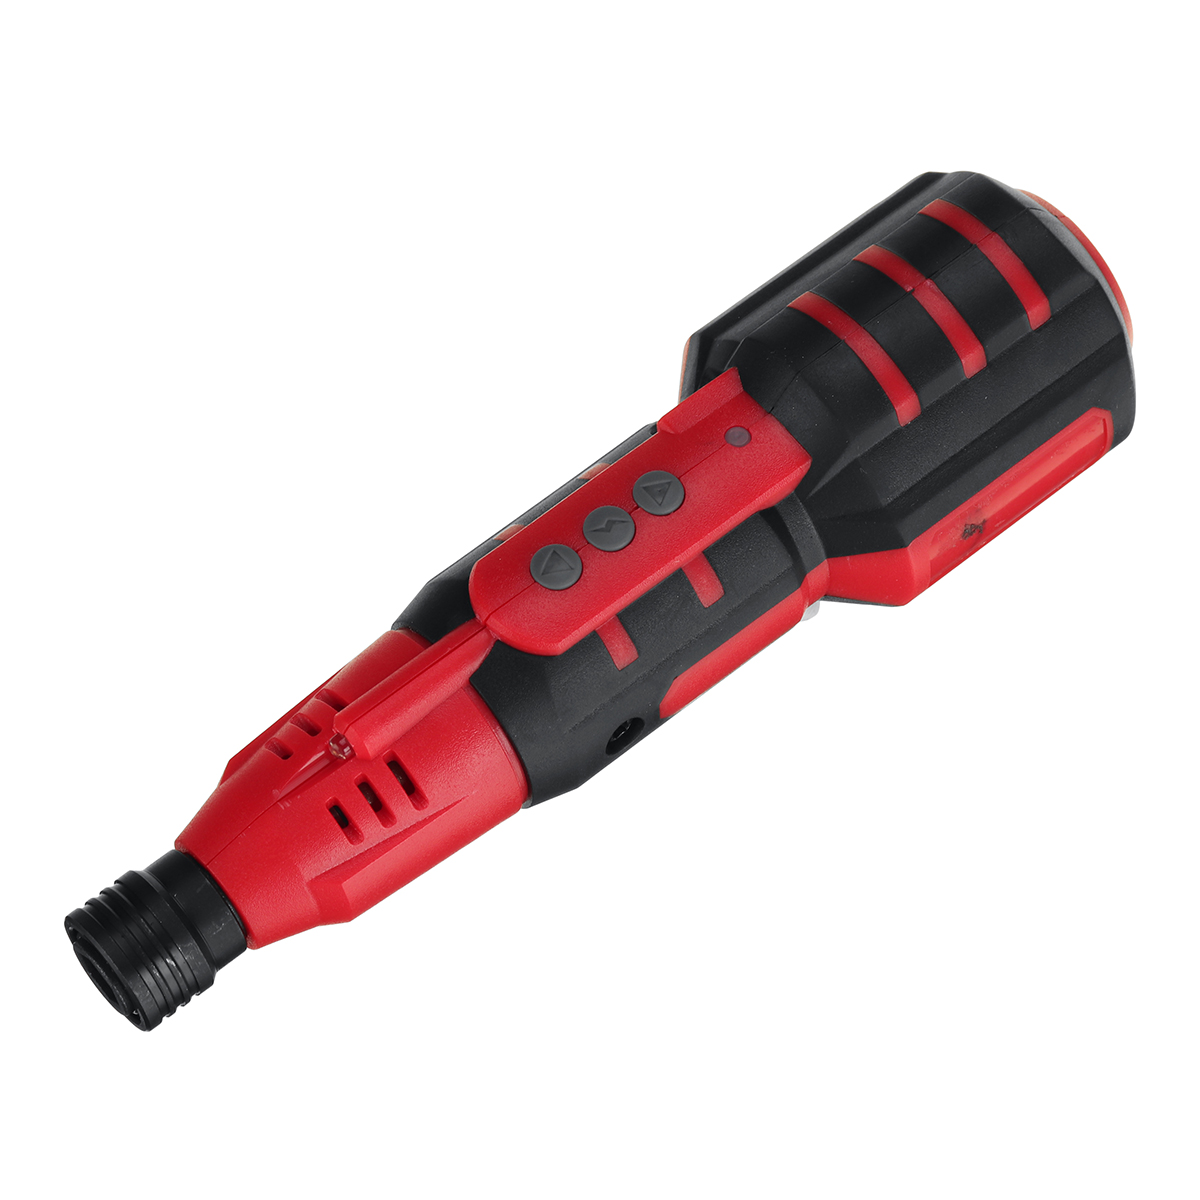 Cordless-Electric-Screwdriver-Set-Electric-Drill-USB-Rechargeable-Handle-With-LED-Light-1913246-8